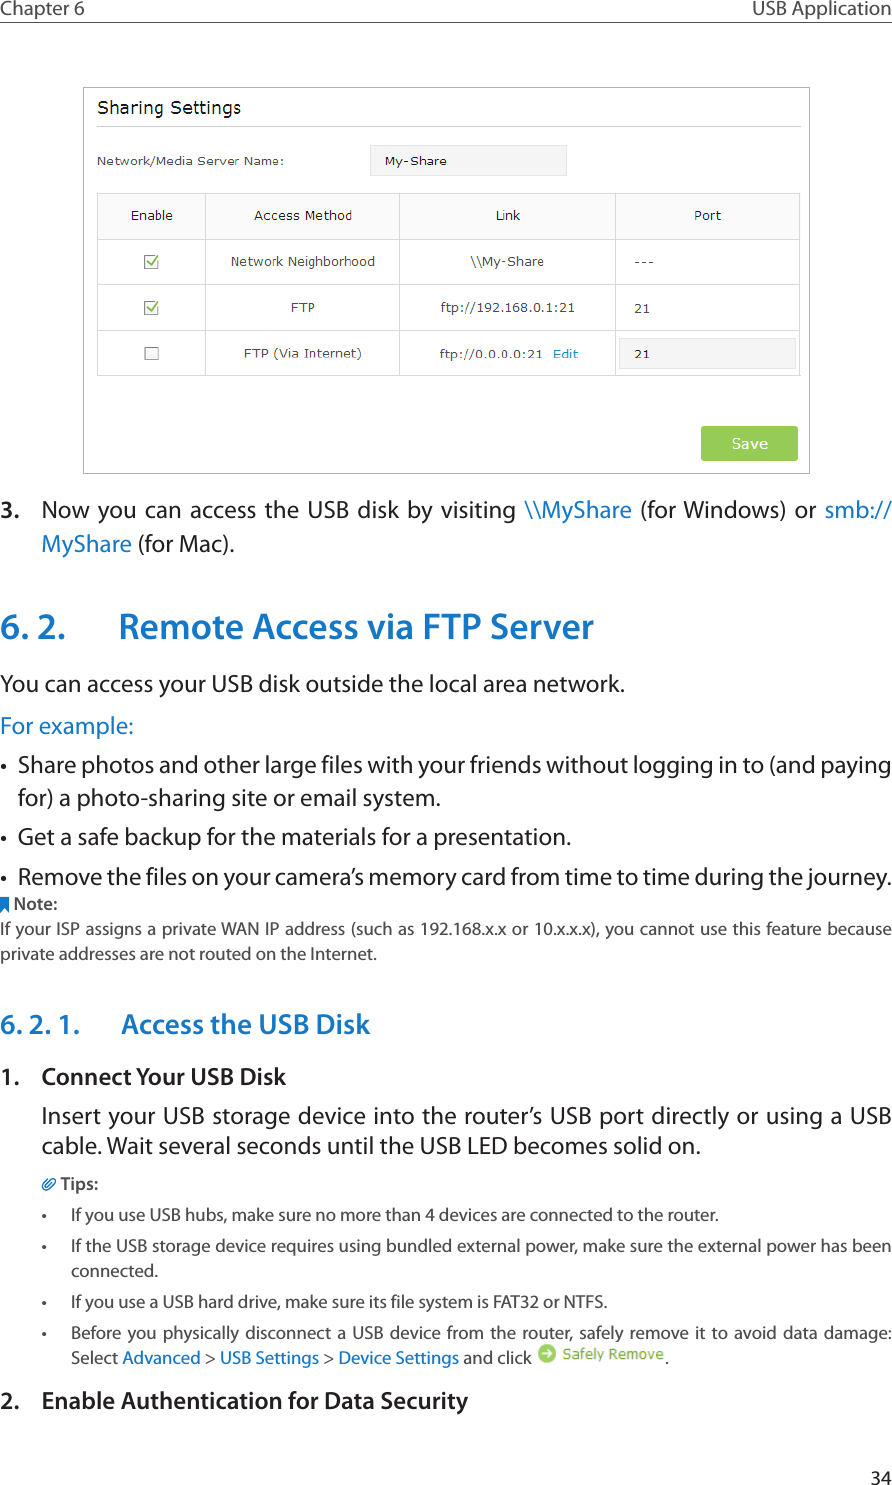 34Chapter 6 USB Application3.  Now you can access the USB disk by visiting \\MyShare (for Windows) or smb://MyShare (for Mac).6. 2.  Remote Access via FTP ServerYou can access your USB disk outside the local area network.For example:•  Share photos and other large files with your friends without logging in to (and paying for) a photo-sharing site or email system.•  Get a safe backup for the materials for a presentation.•  Remove the files on your camera’s memory card from time to time during the journey.Note:If your ISP assigns a private WAN IP address (such as 192.168.x.x or 10.x.x.x), you cannot use this feature because private addresses are not routed on the Internet.6. 2. 1.  Access the USB Disk1.  Connect Your USB DiskInsert your USB storage device into the router’s USB port directly or using a USB cable. Wait several seconds until the USB LED becomes solid on.Tips:•  If you use USB hubs, make sure no more than 4 devices are connected to the router.•  If the USB storage device requires using bundled external power, make sure the external power has been connected.•  If you use a USB hard drive, make sure its file system is FAT32 or NTFS.•  Before you physically disconnect a USB device from the router, safely remove it to avoid data damage: Select Advanced &gt; USB Settings &gt; Device Settings and click  .2.  Enable Authentication for Data Security